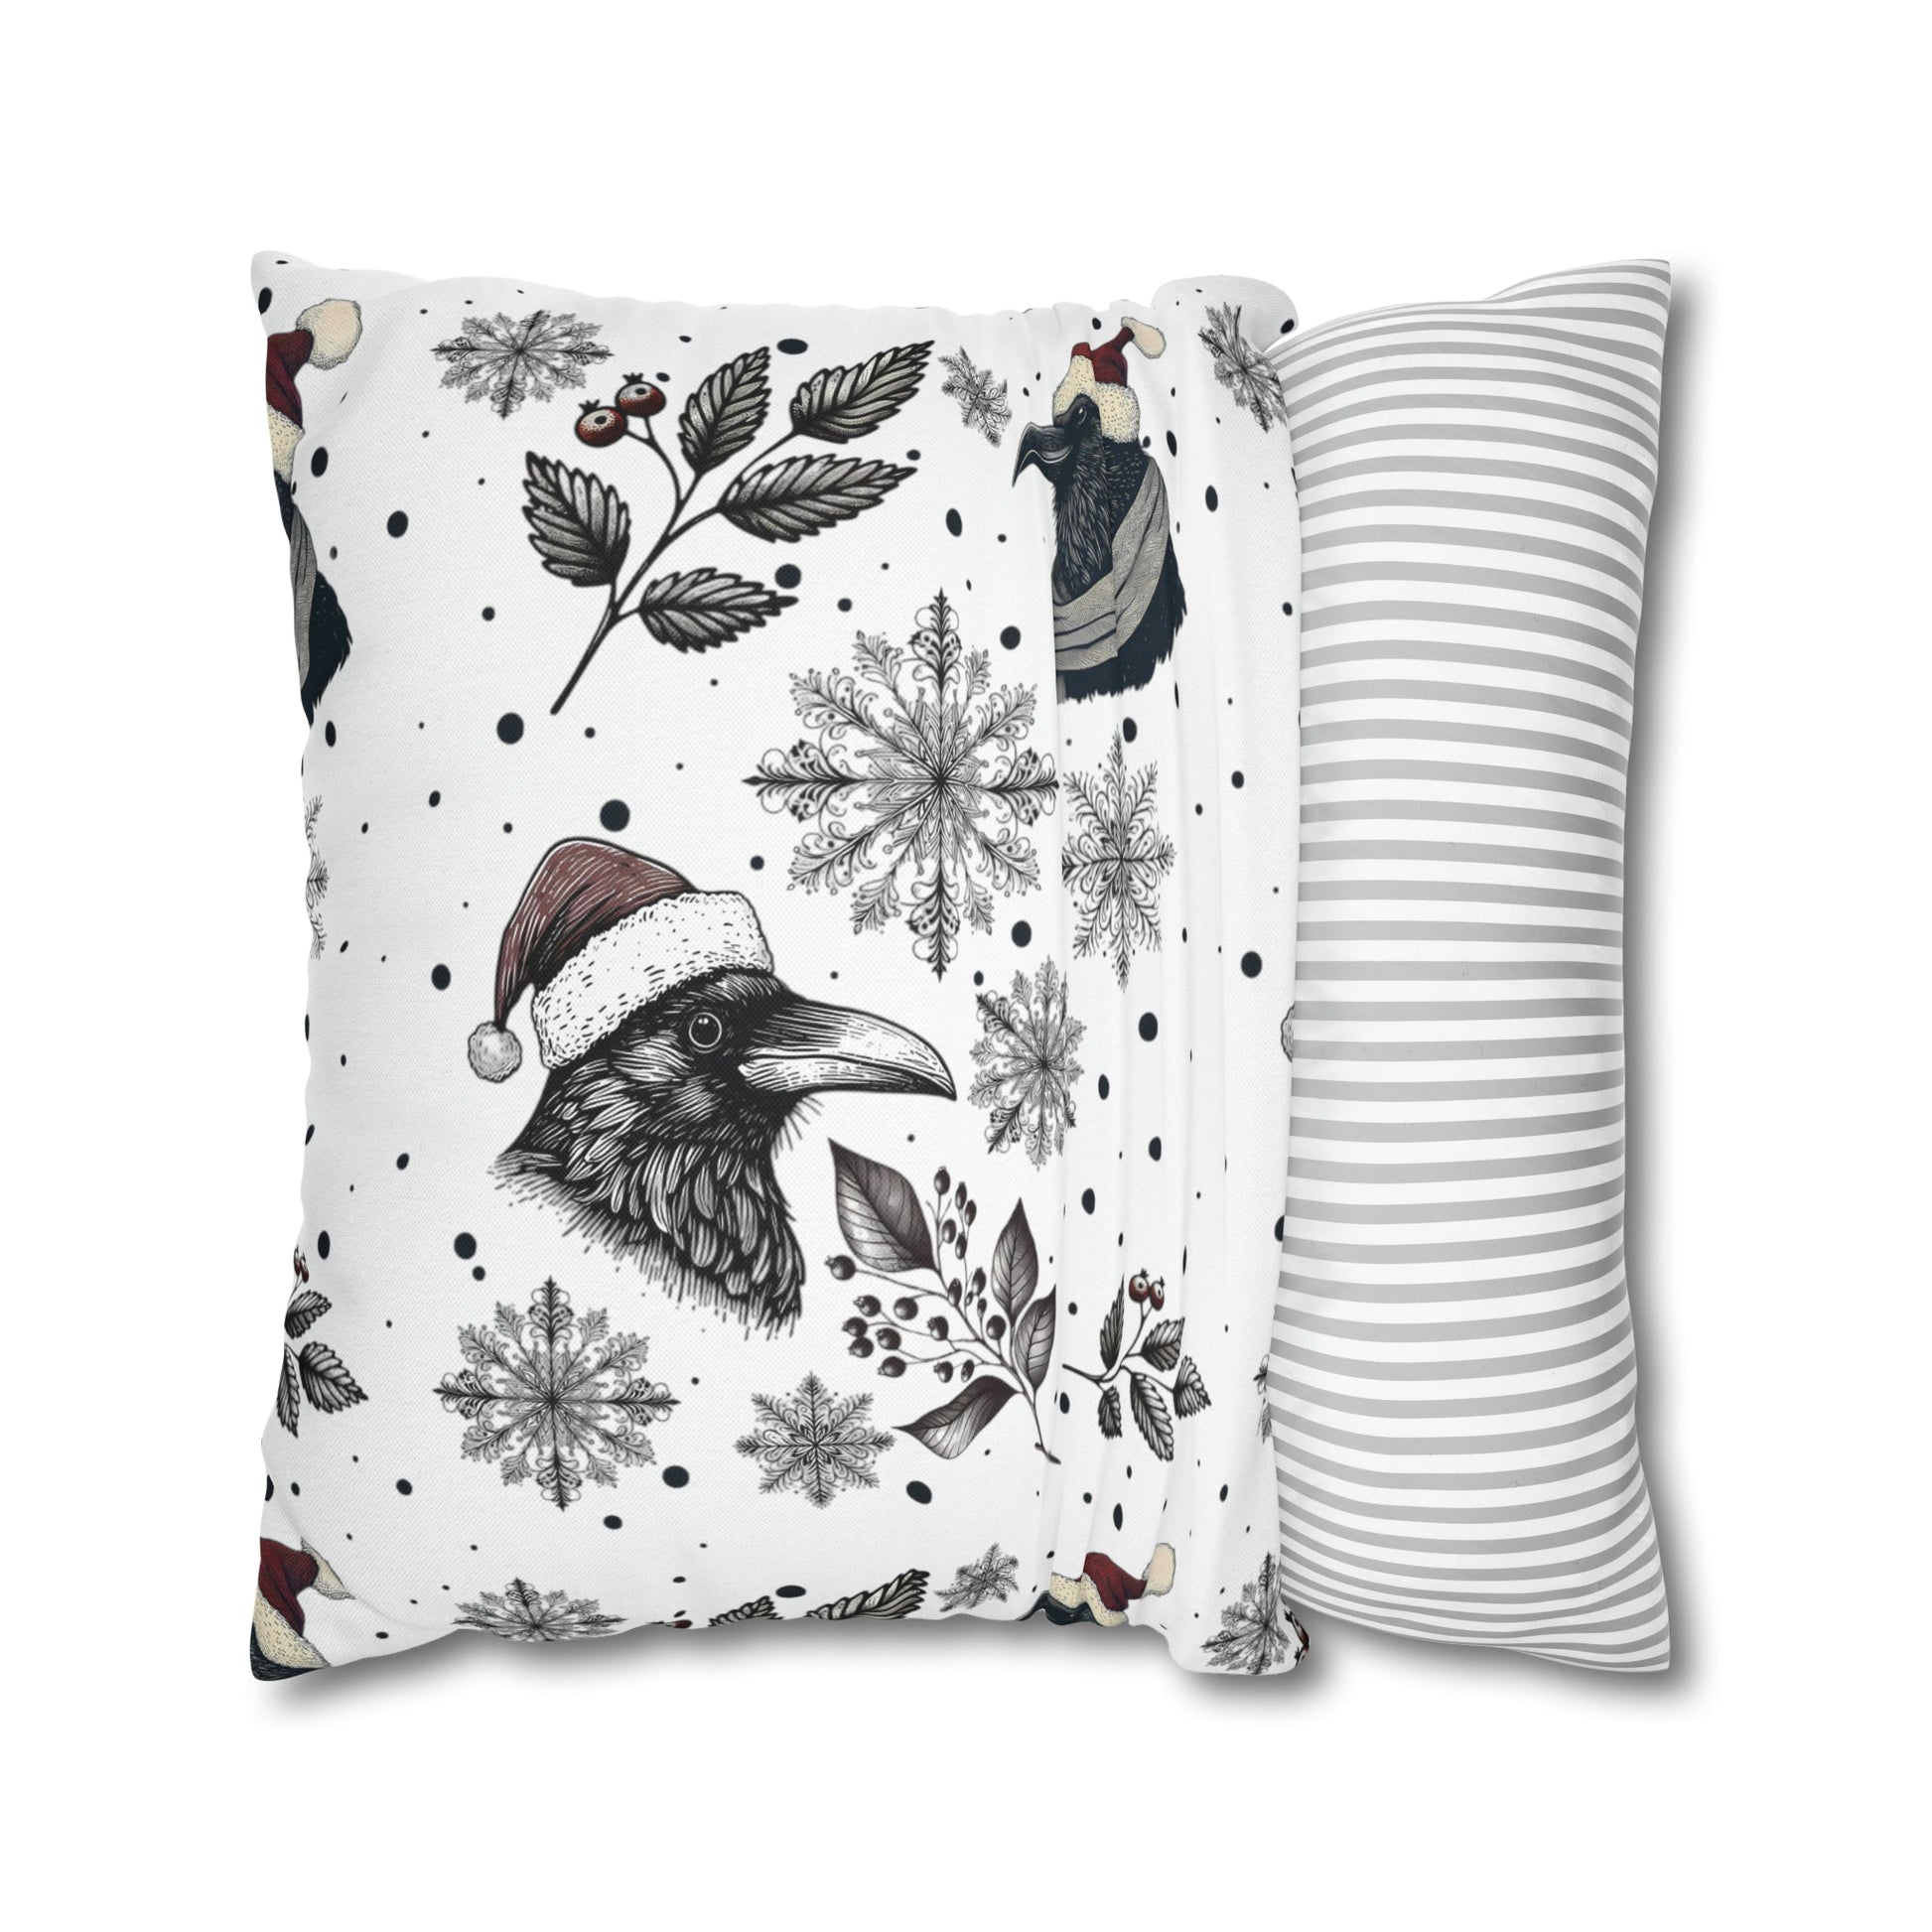 Christmas Ravens and Snowflakes Square Pillow CaseHome DecorVTZdesigns20" × 20"All Over PrintAOPBed